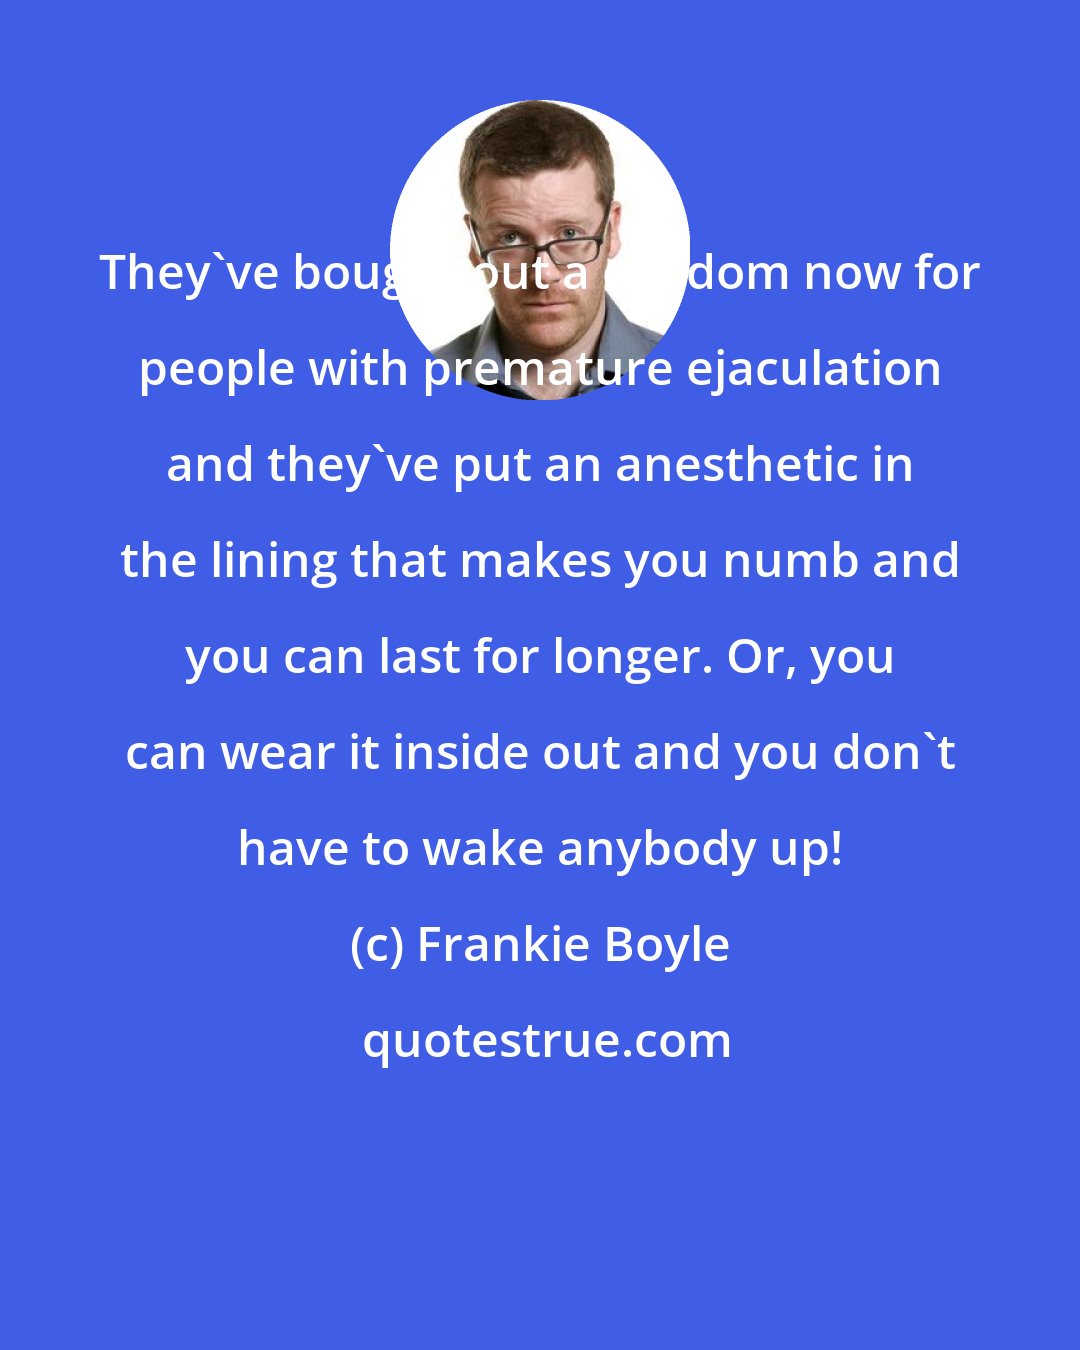 Frankie Boyle: They've bought out a condom now for people with premature ejaculation and they've put an anesthetic in the lining that makes you numb and you can last for longer. Or, you can wear it inside out and you don't have to wake anybody up!